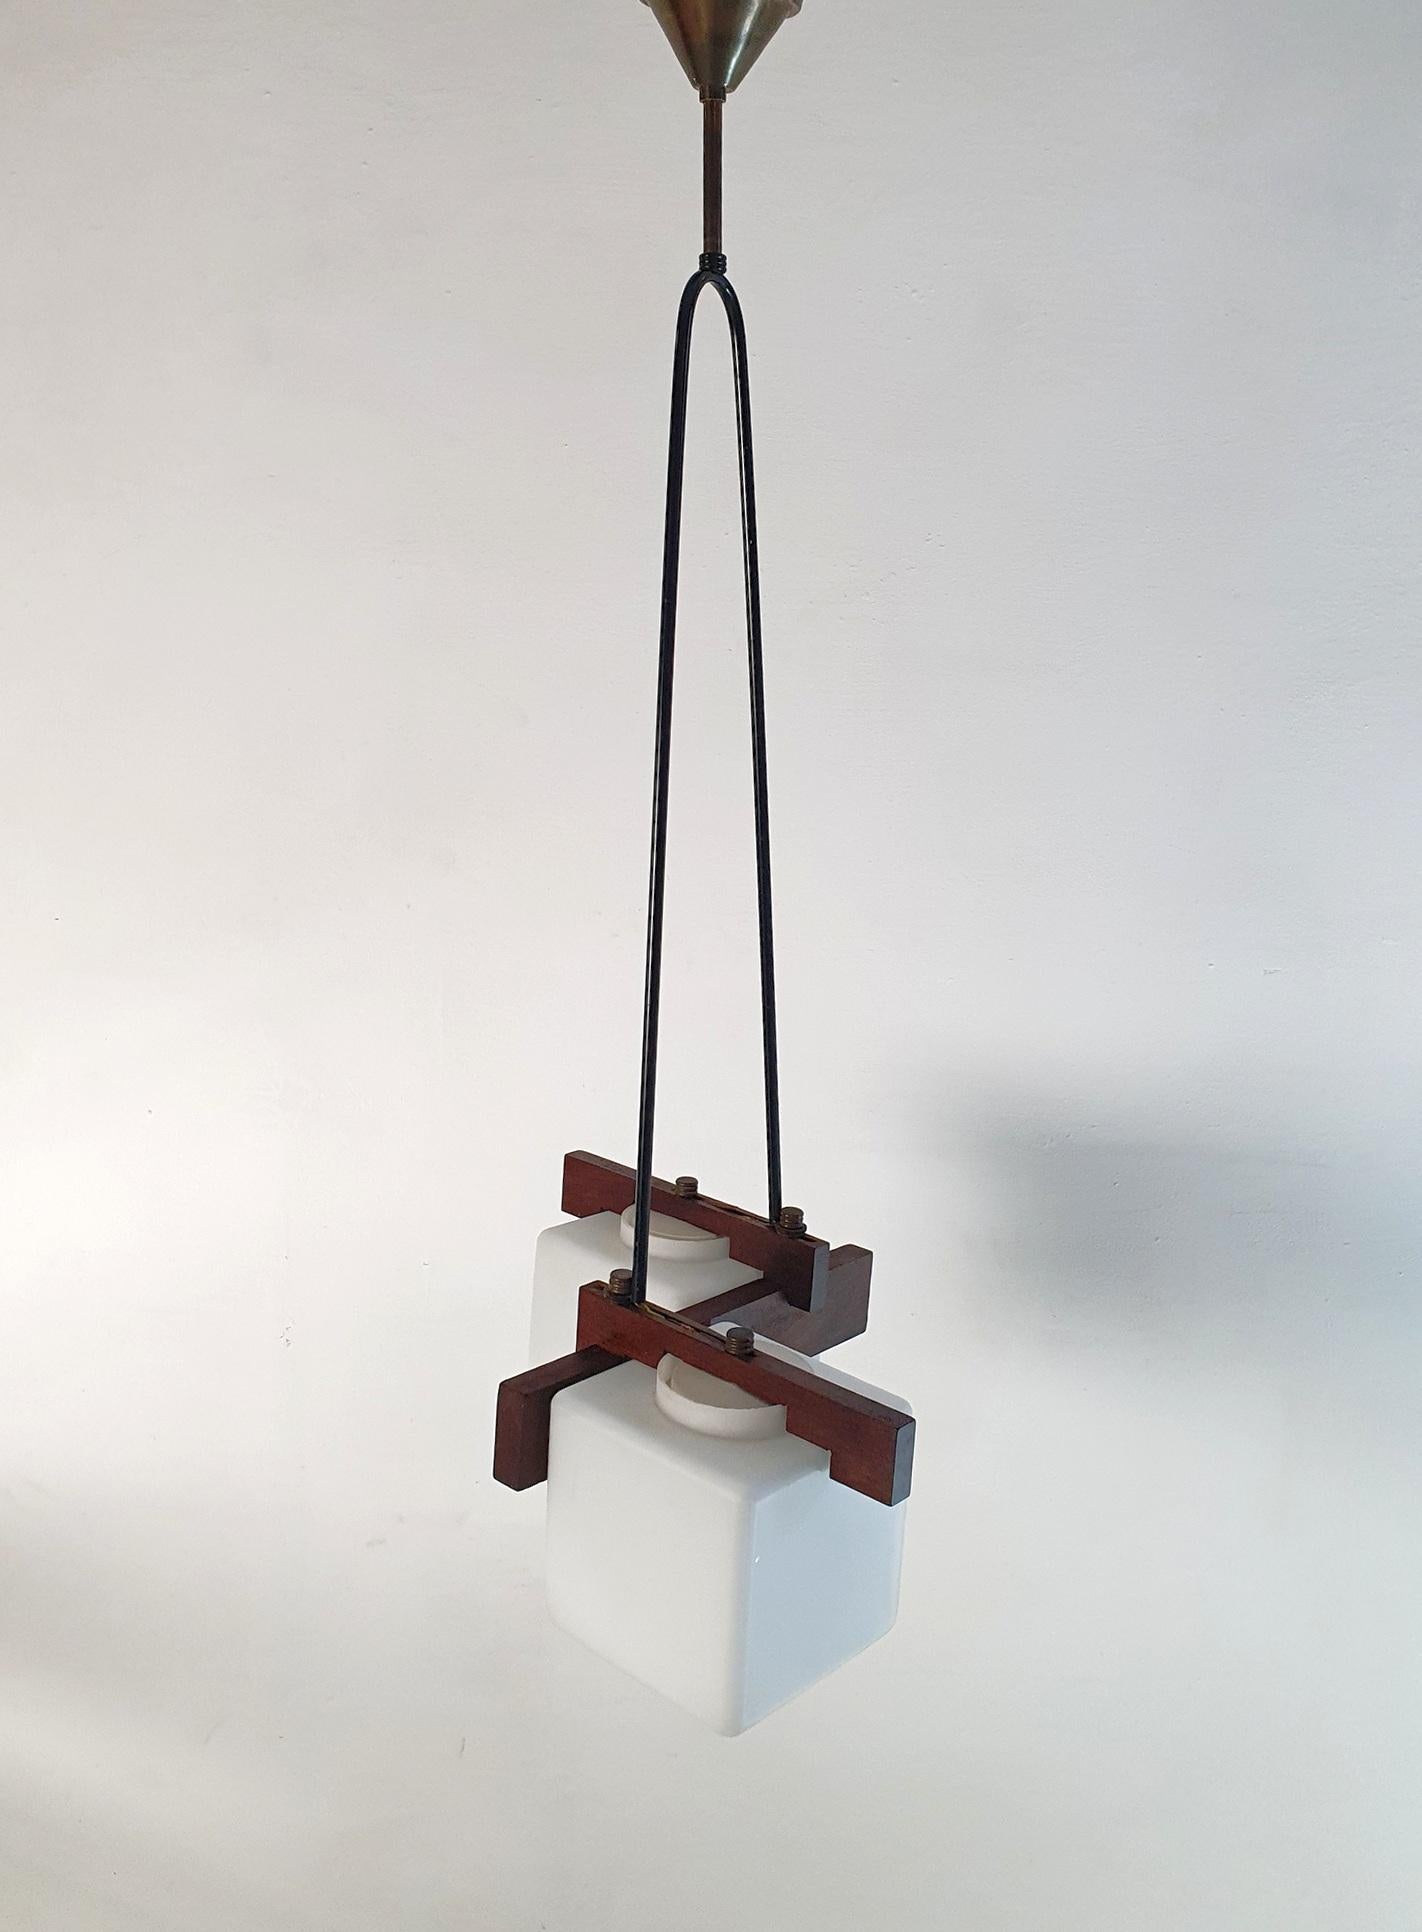 Midcentury 1960s pendant with four lights fitted for E14. Original lampshades made in white opaline glass attached on black powder coated aluminium and brass with teak details. Fully functioning and in great condition.

